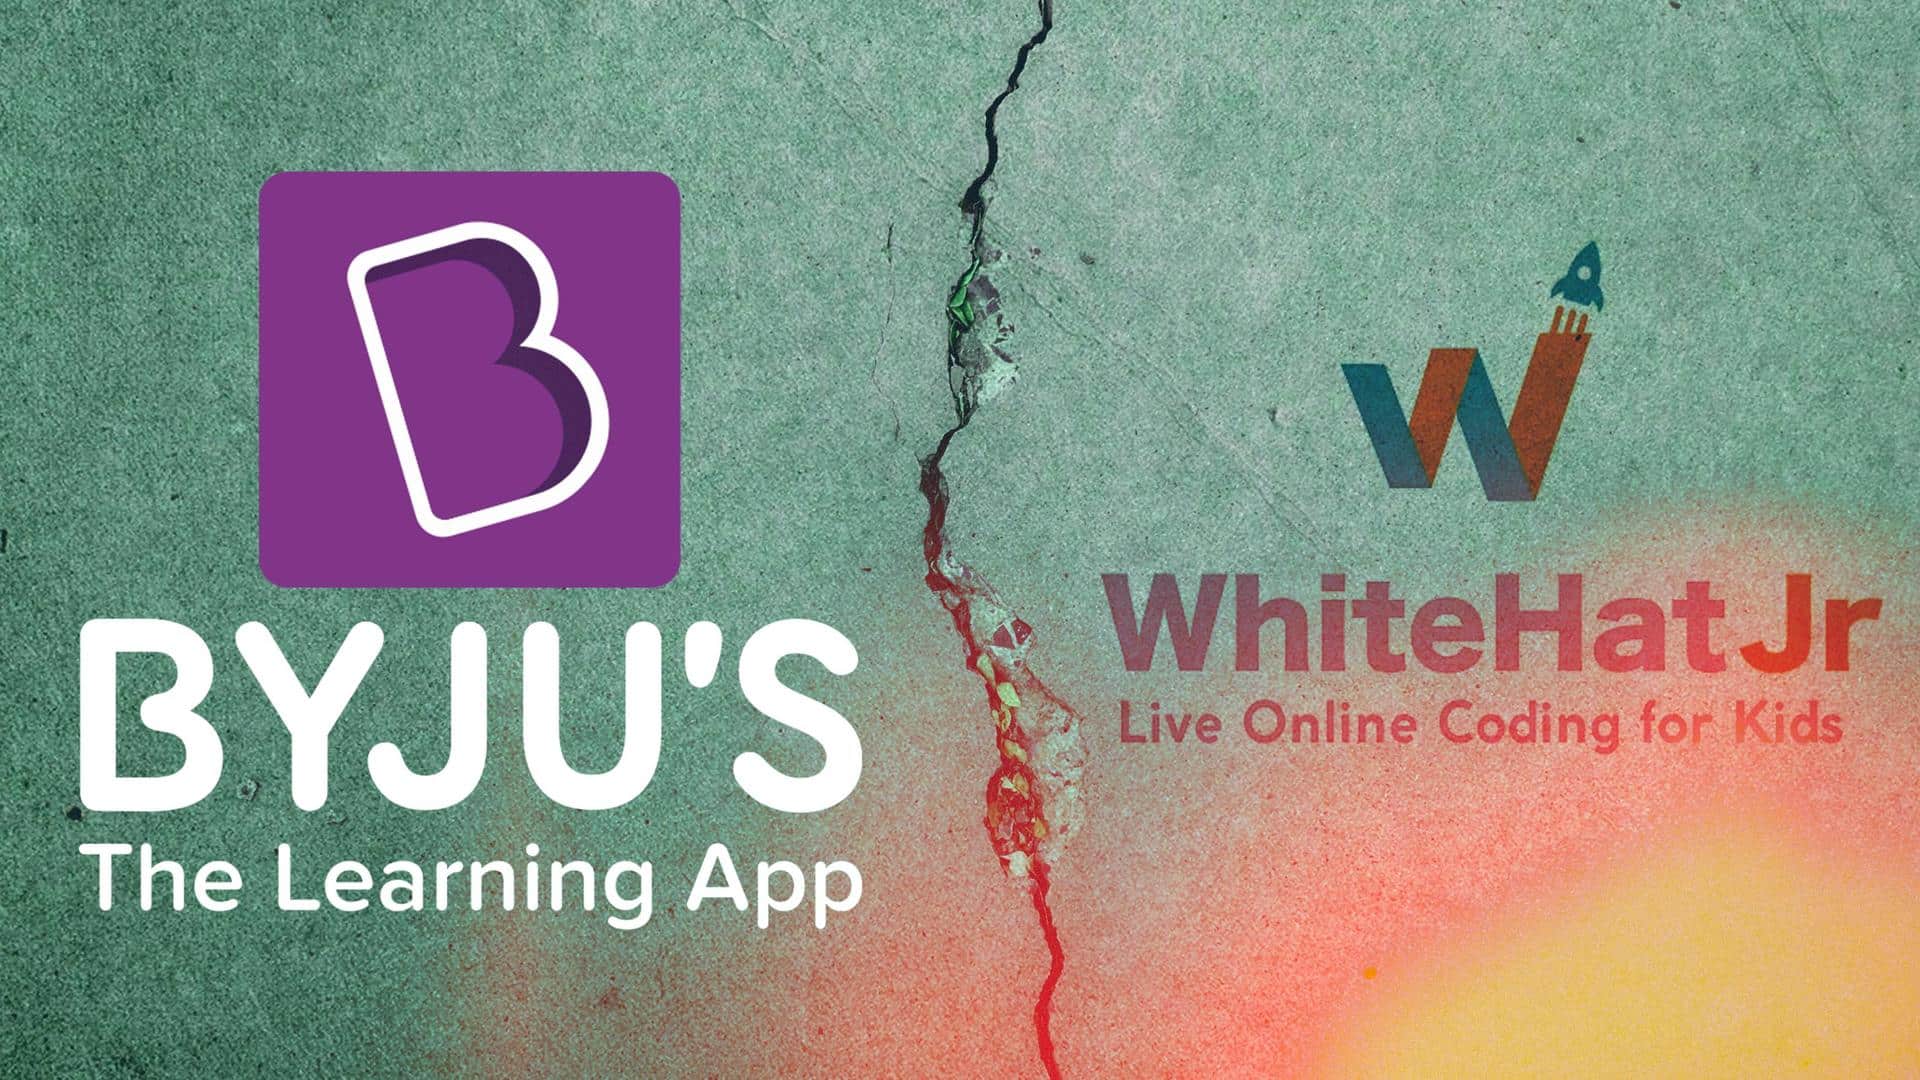 Employees At WhiteHat Jr. Owned By Byju's Are Fired Without Notice